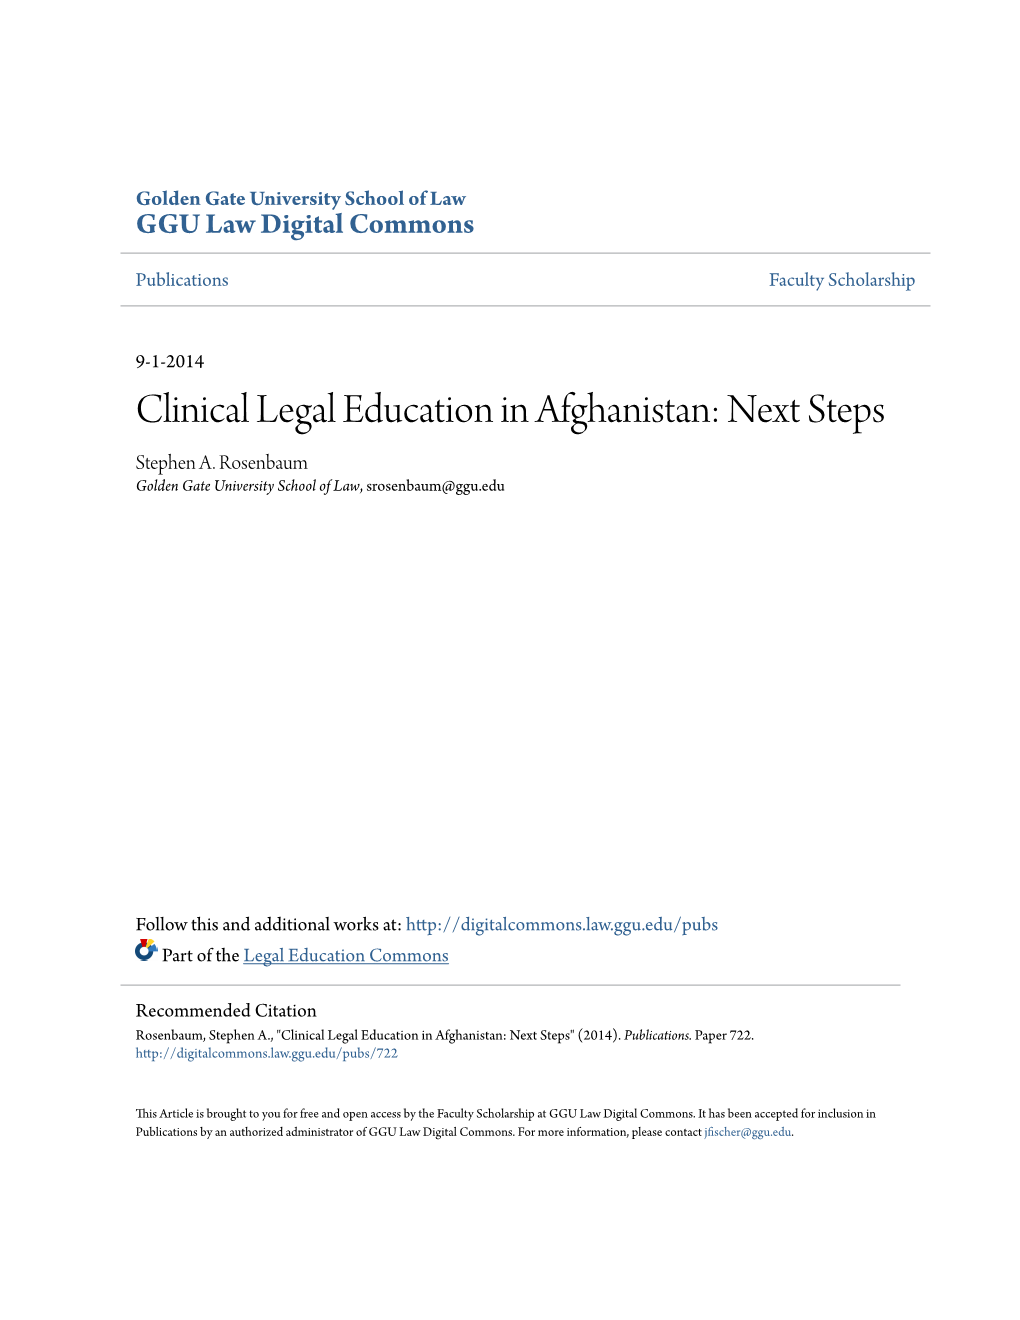 Clinical Legal Education in Afghanistan: Next Steps Stephen A